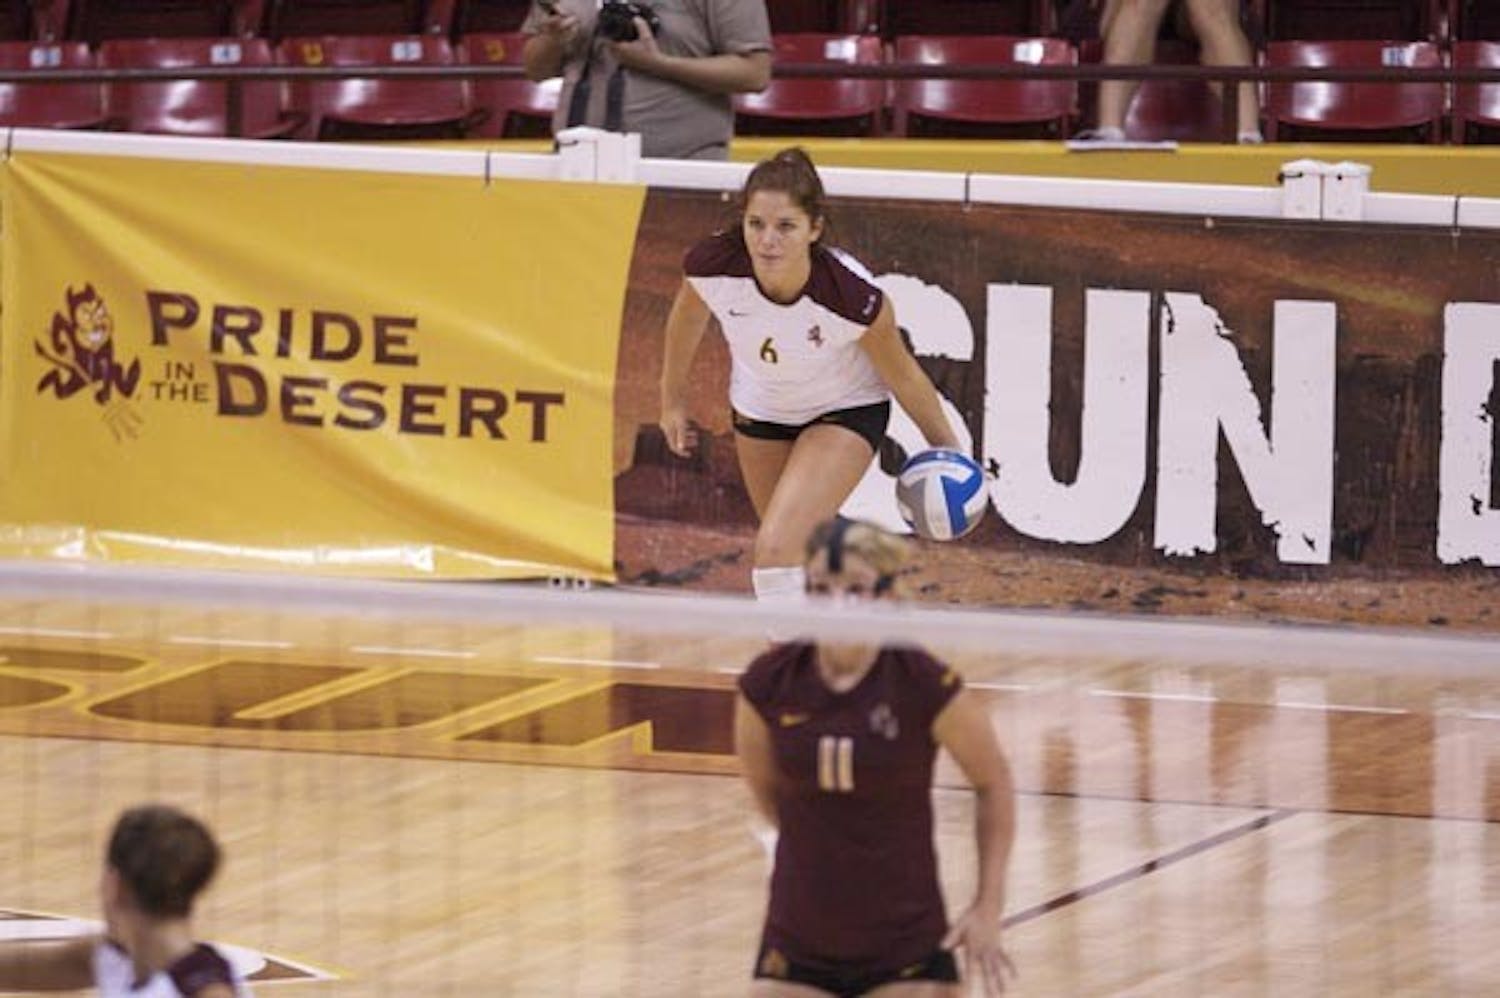 FULL FOCUS: Freshman setter Stephanie Preach prepares to serve during a home match last weekend. ASU lost over the weekend to UA 0-3 in the season opener of the Territorial Cup Series. (Photo by Scott Stuk)